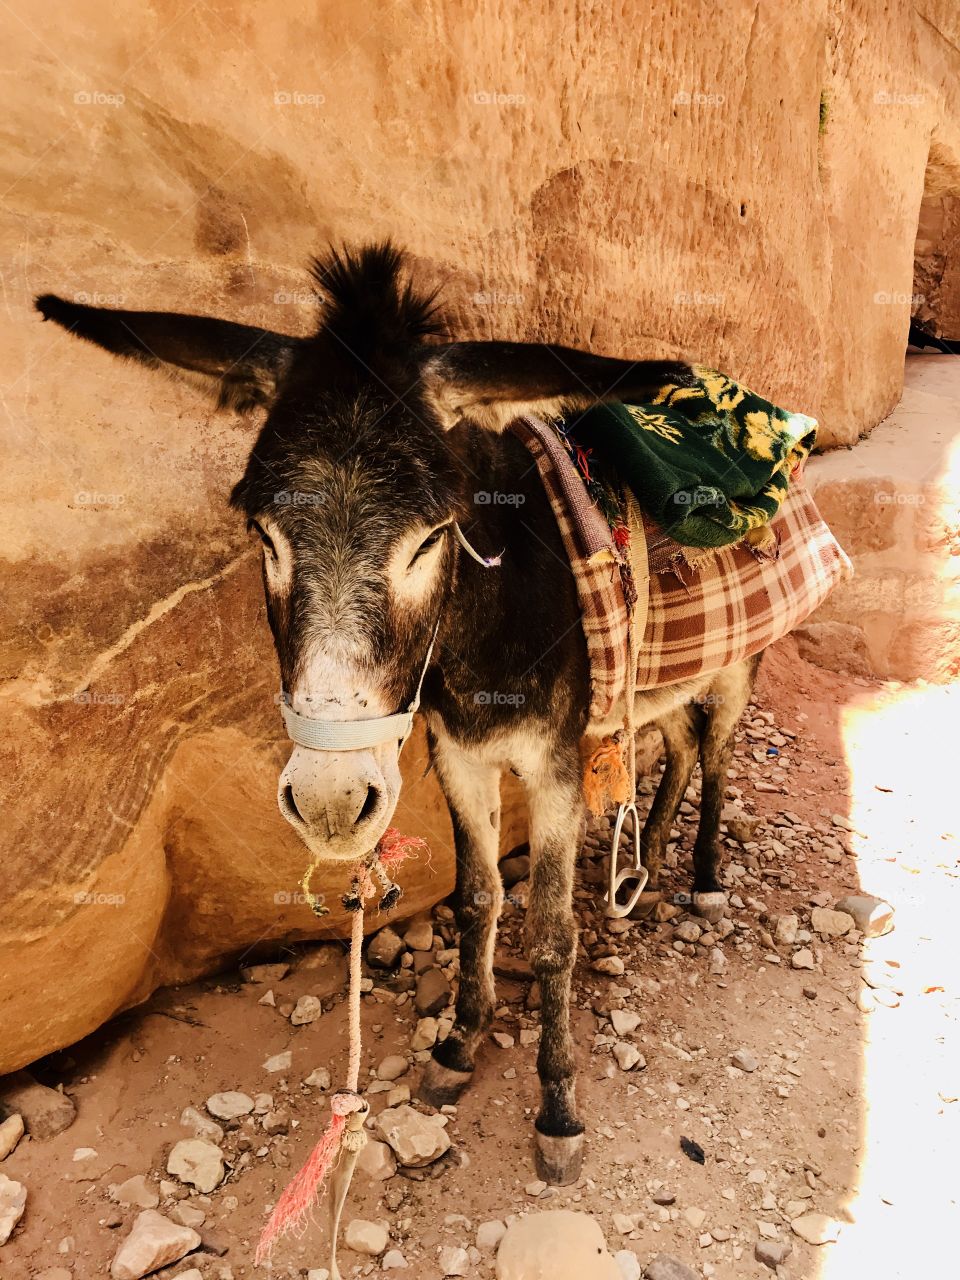 A donkey Looking tiede